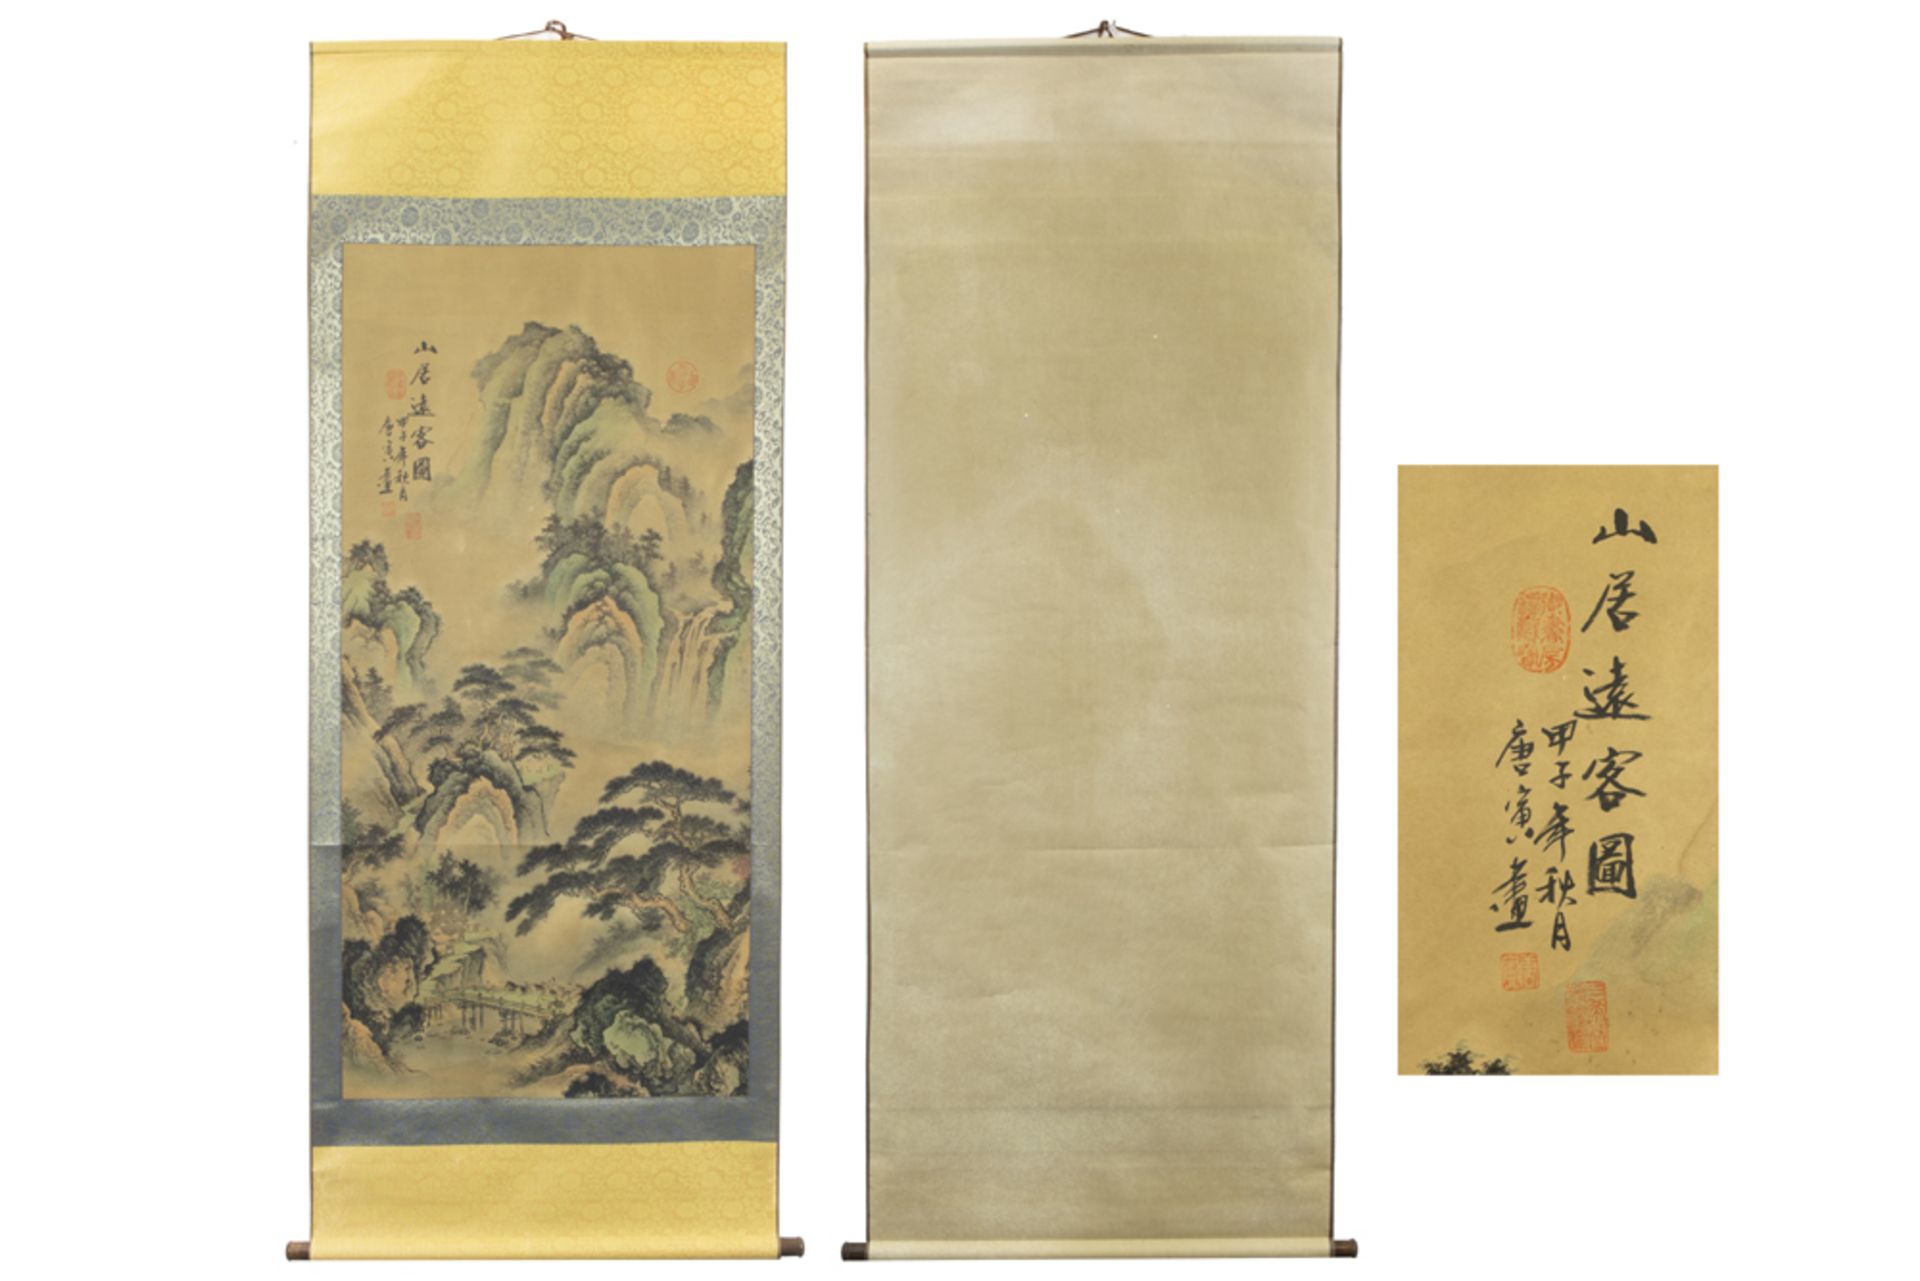 antique Chinese scroll with a landscape painting || Antieke Chinese scroll met landschapsschildering